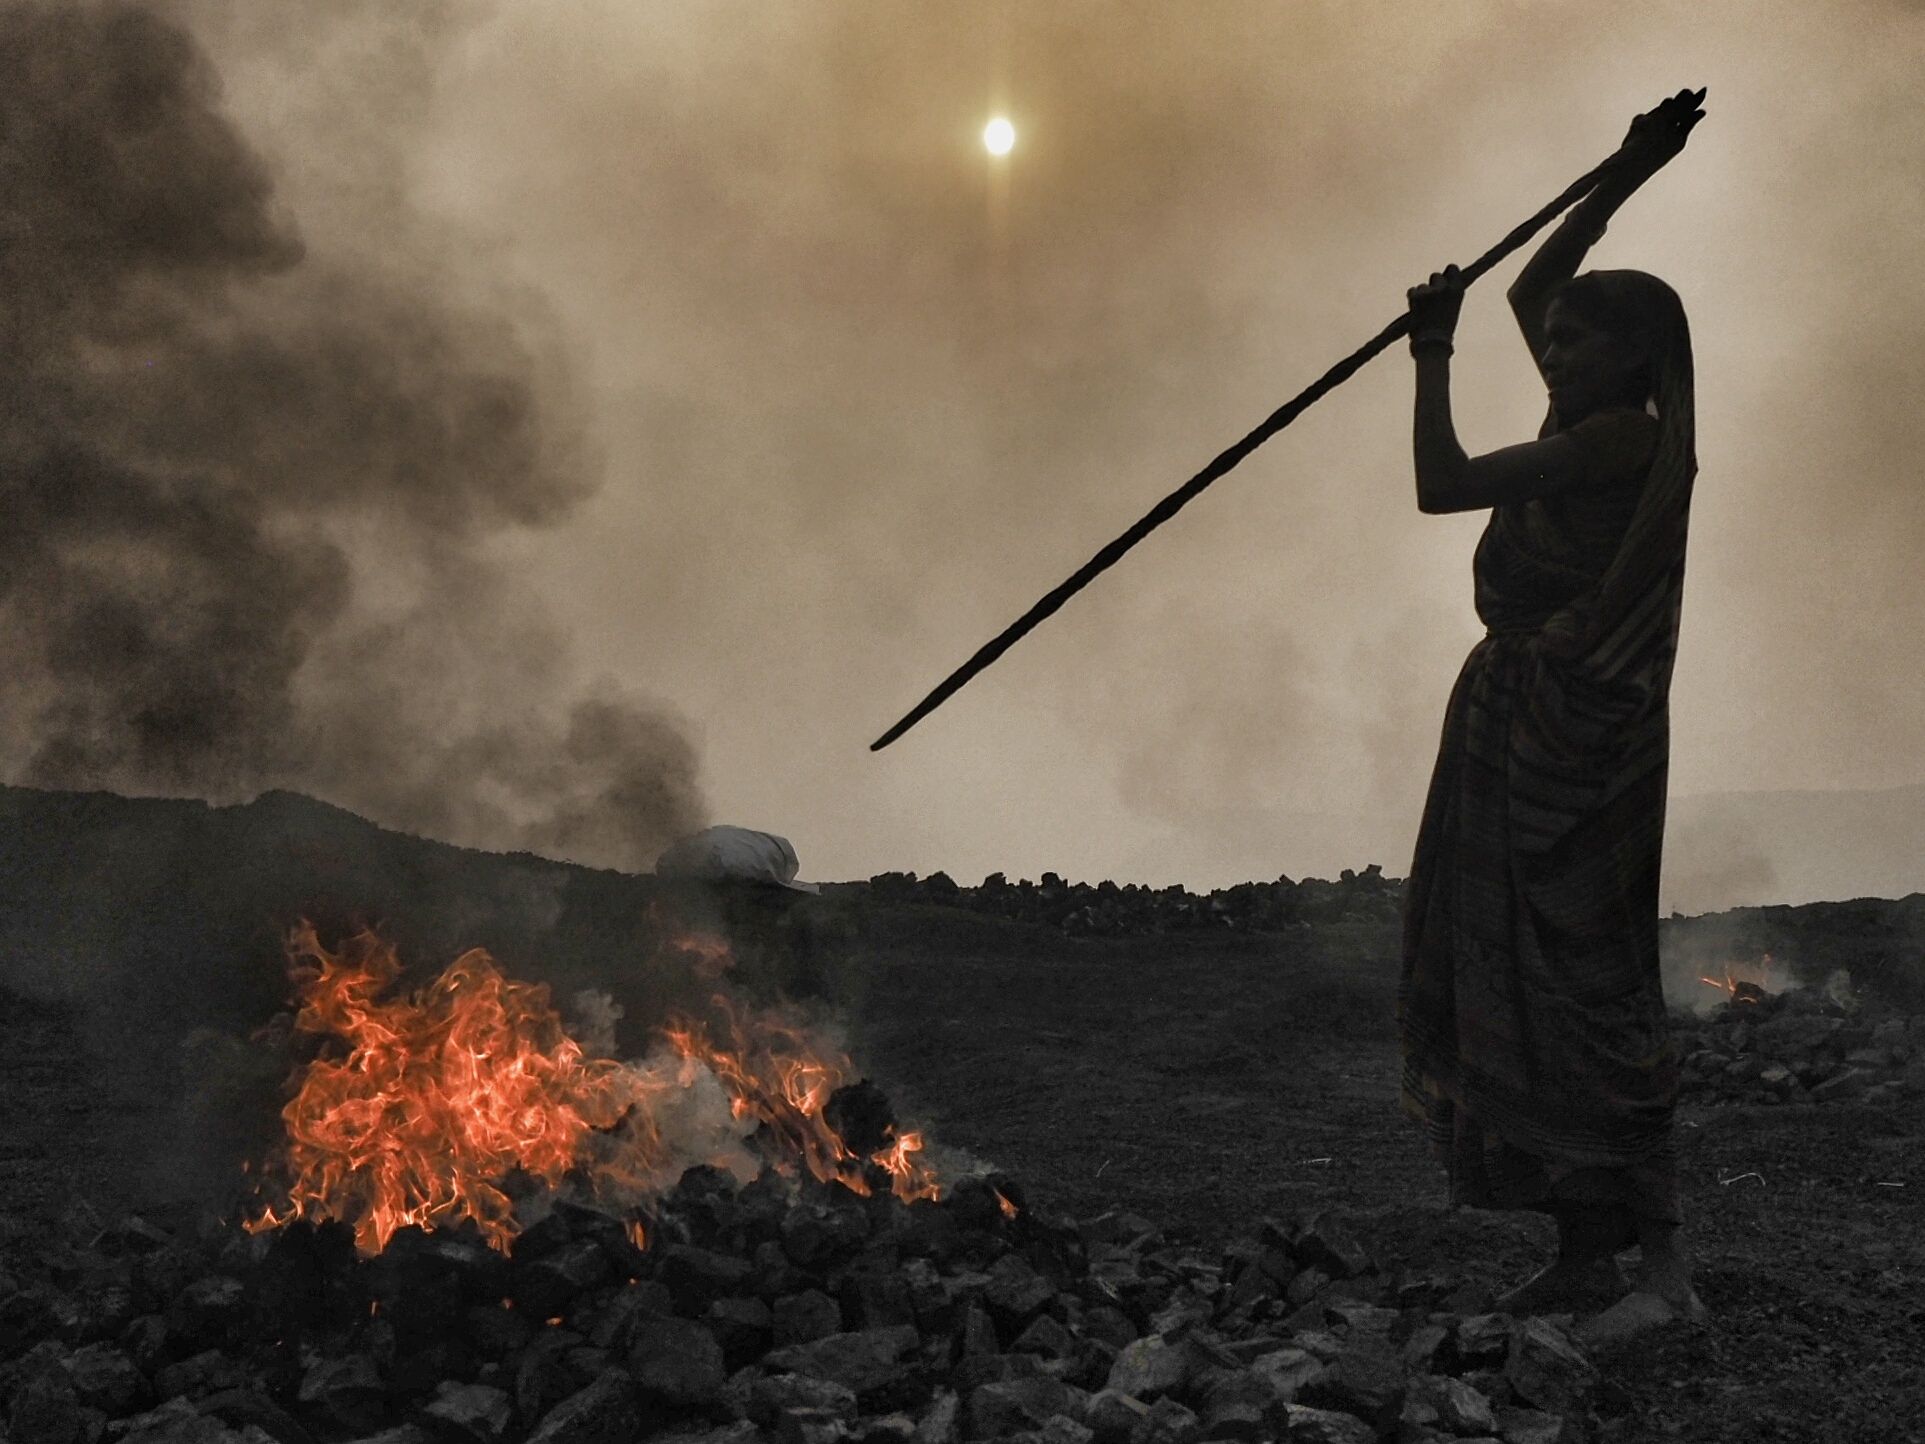 At sunrise, a woman jabs a steel into a burning pile of coal.